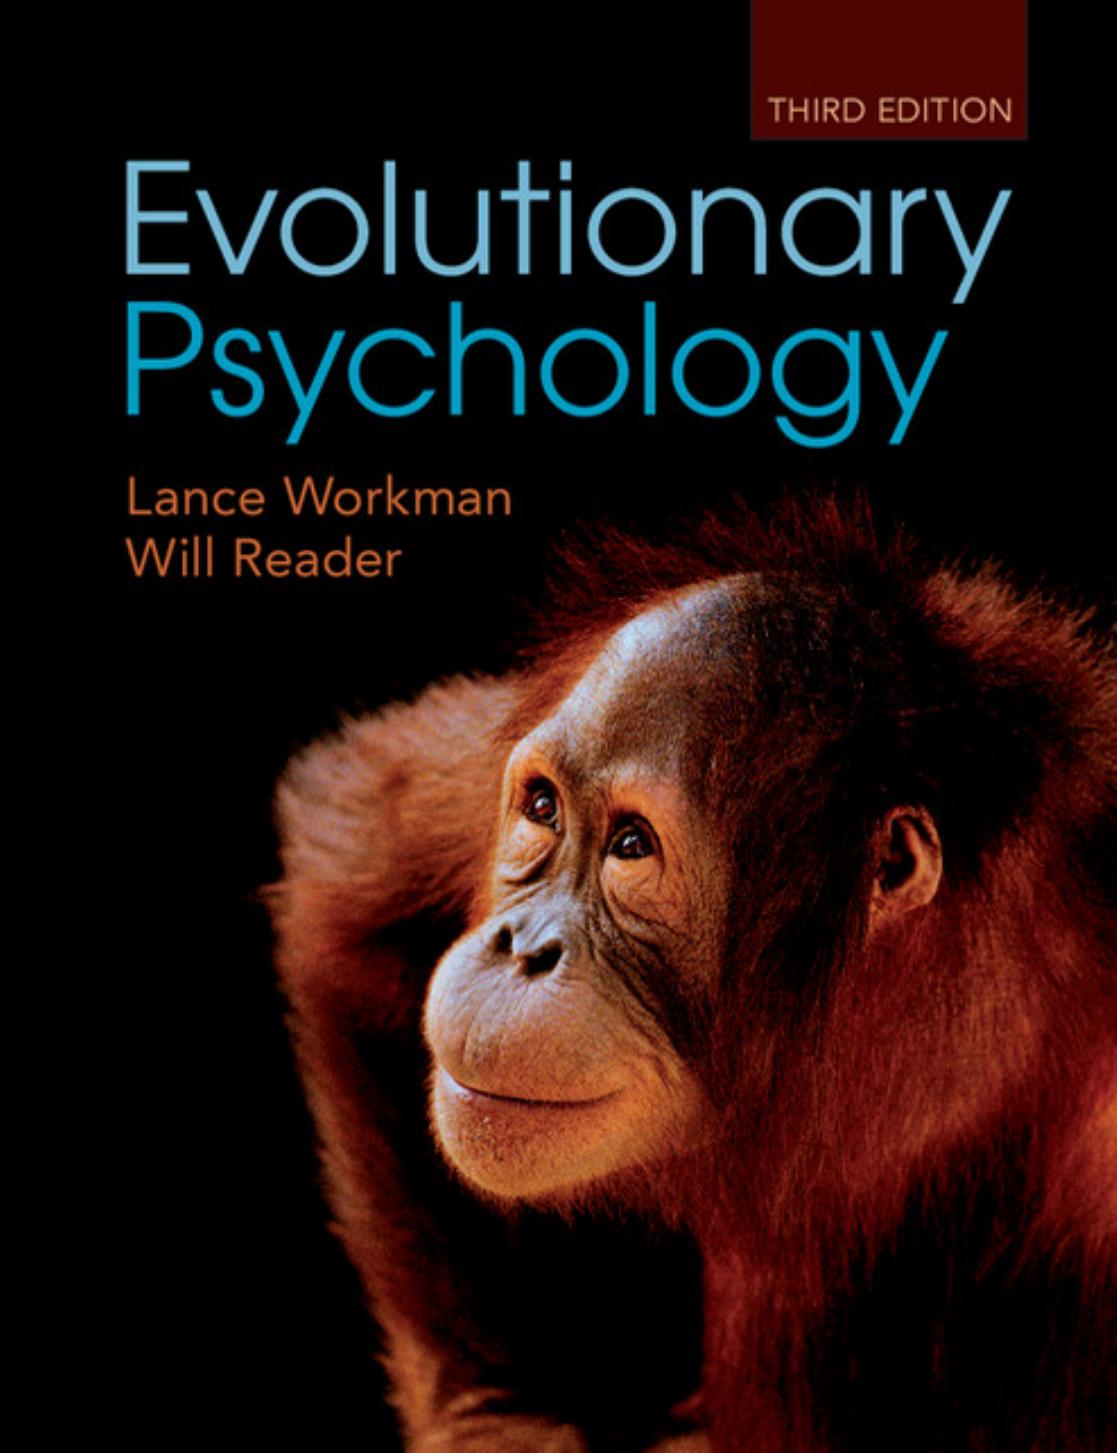 Evolutionary Psychology by Lance Workman & Will Reader